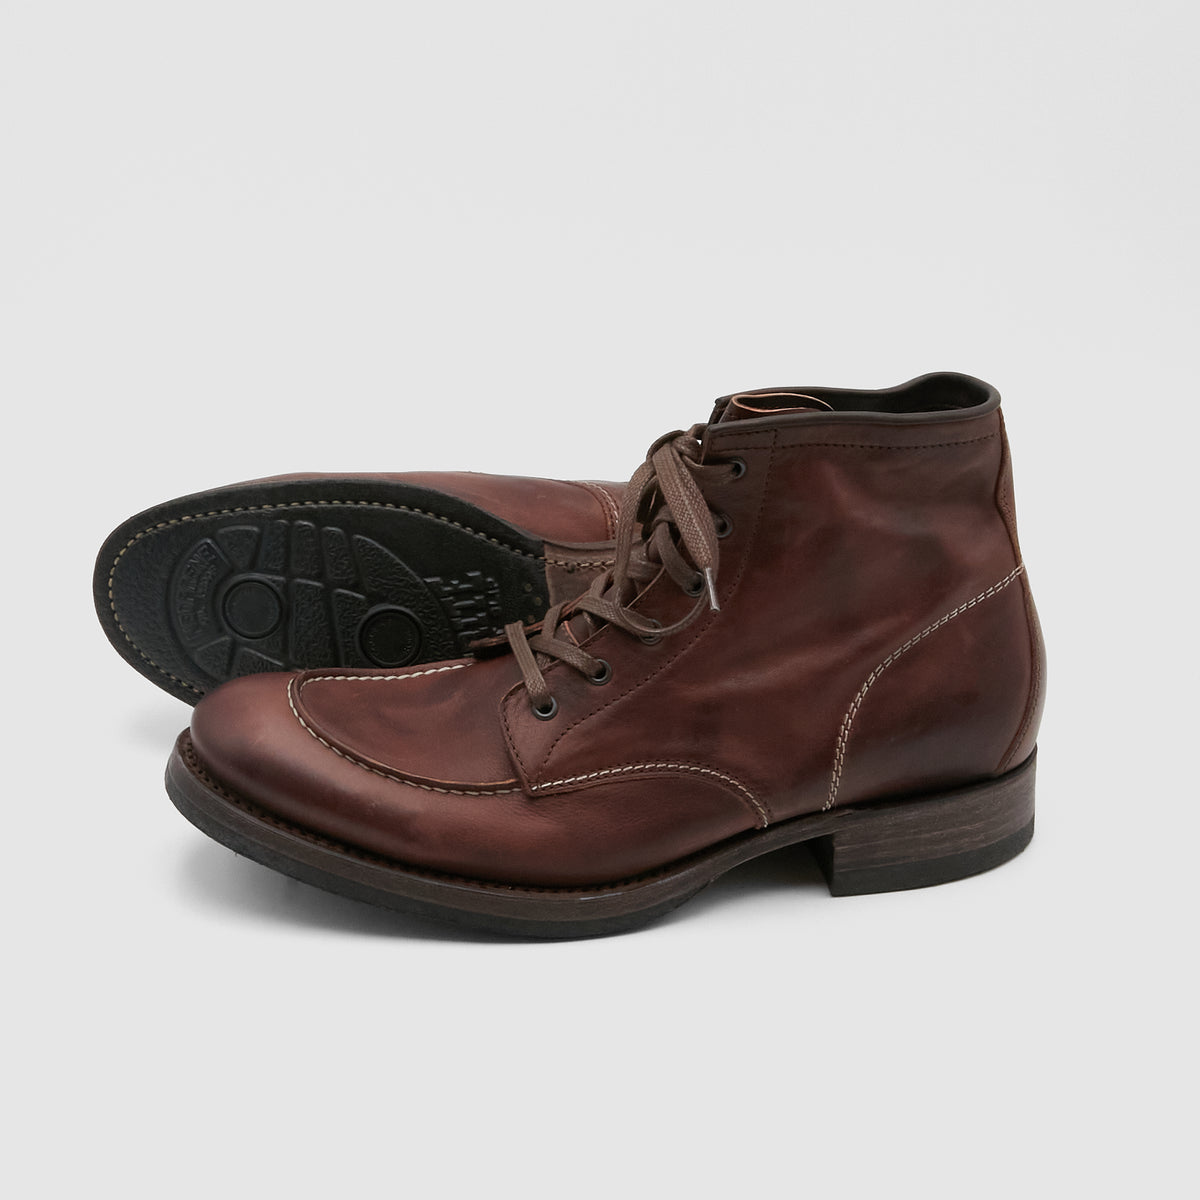 n.d.c. made by hand Cat`s Paw Work Boots